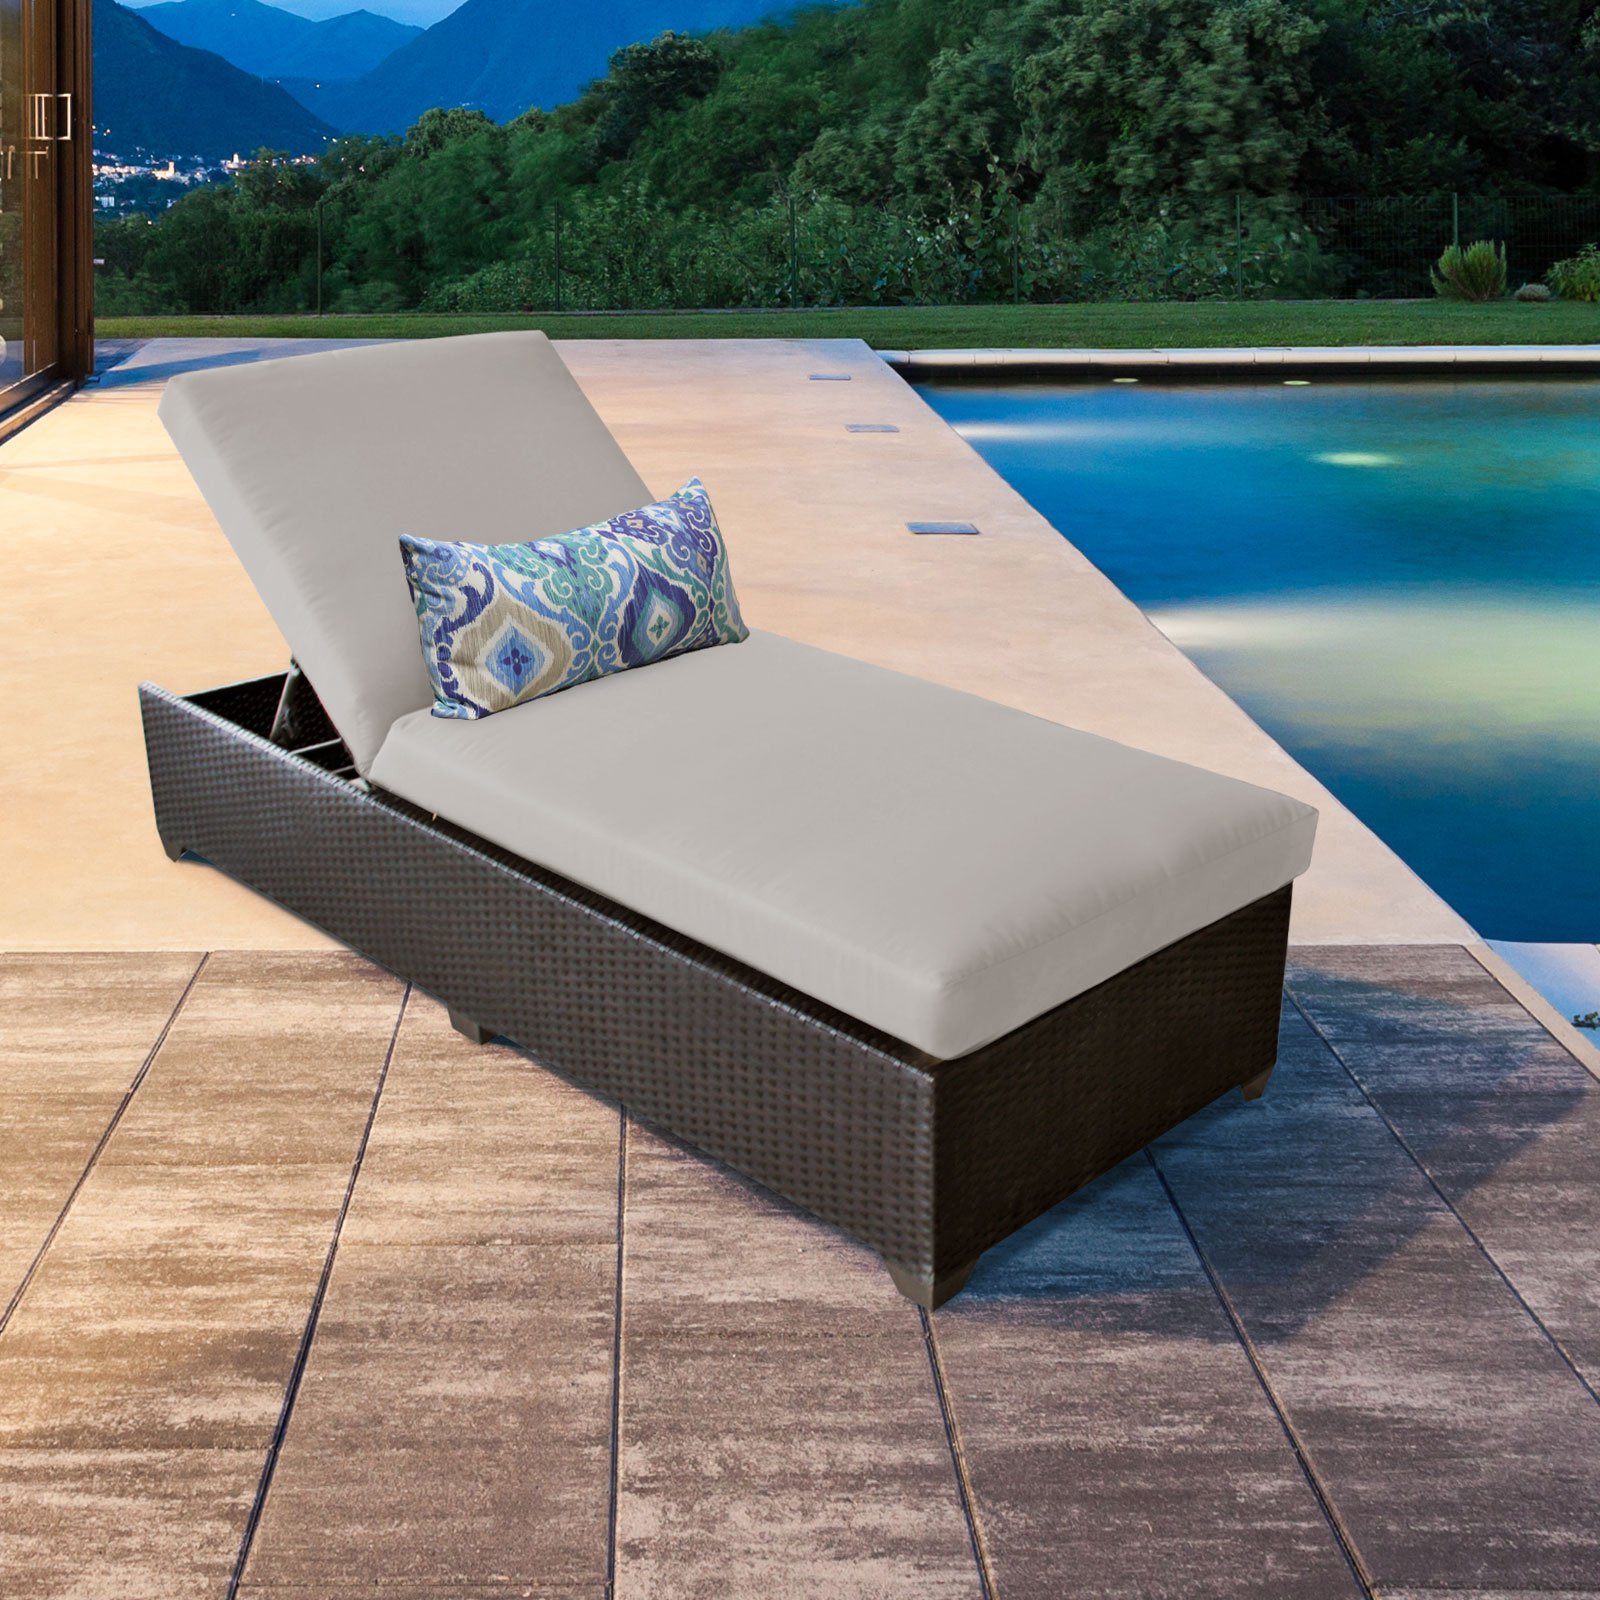 TK Classics Barbados Wicker Patio Chaise Lounge with Optional Side Table - image 3 of 10